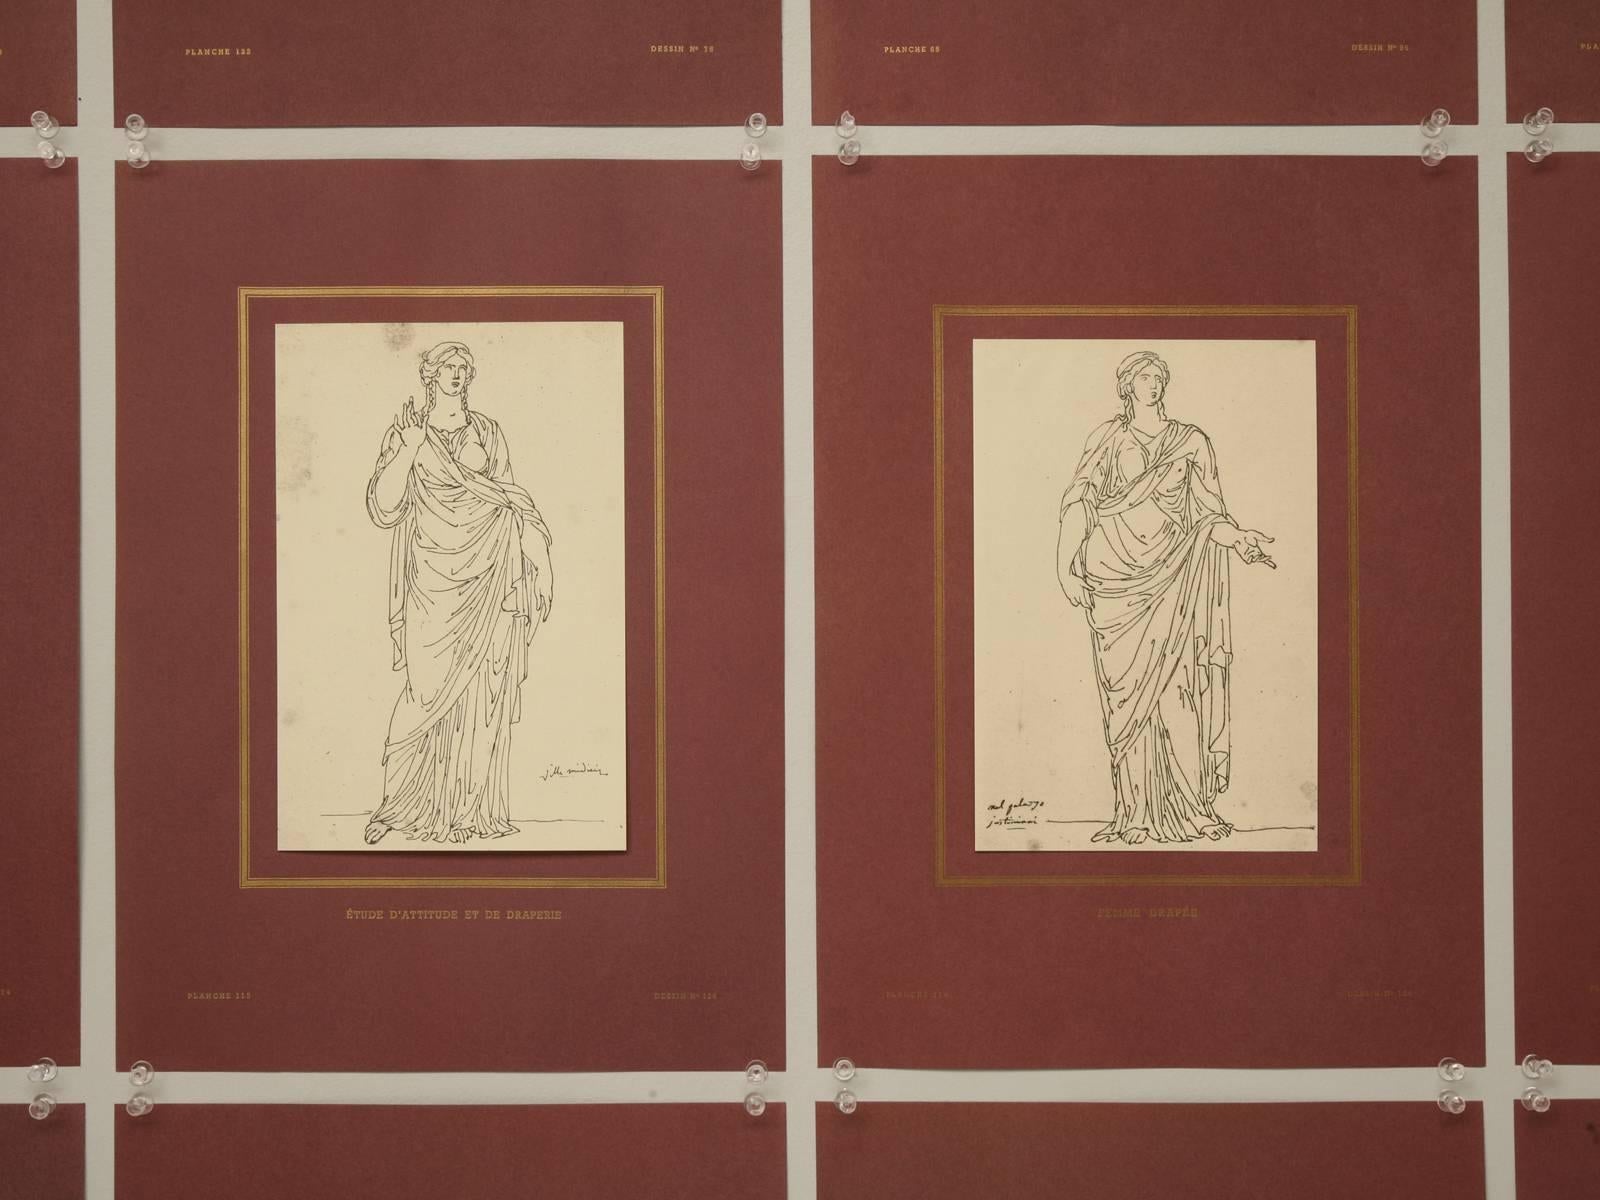 A collection of 20 prints taken from the original plates of Louis David. Jacques-Louis David was born in Paris, France and lived from 1748-1825 and was one of the most pre-eminent artist of his generation. These prints are taken from a book produced